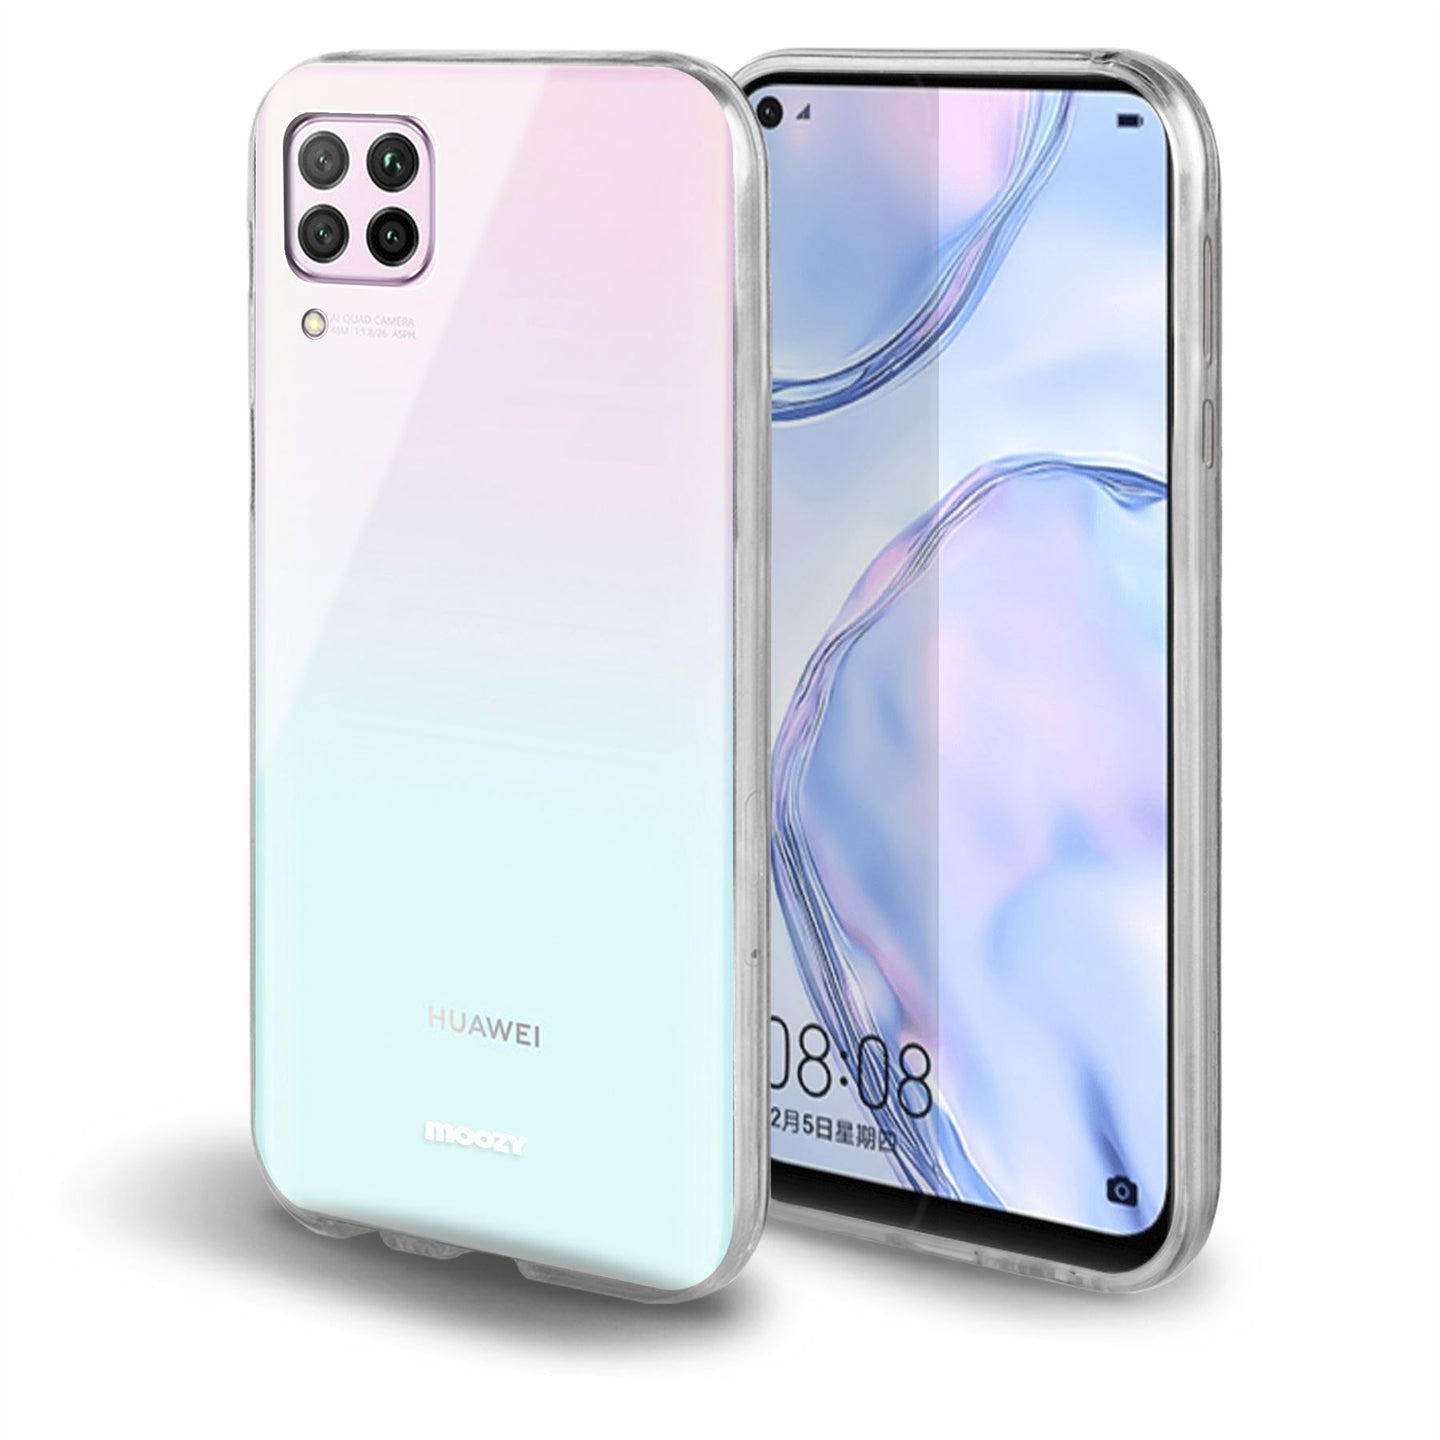 Moozy 360 Degree Case for Huawei P40 Lite - Transparent Full body Slim Cover - Hard PC Back and Soft TPU Silicone Front